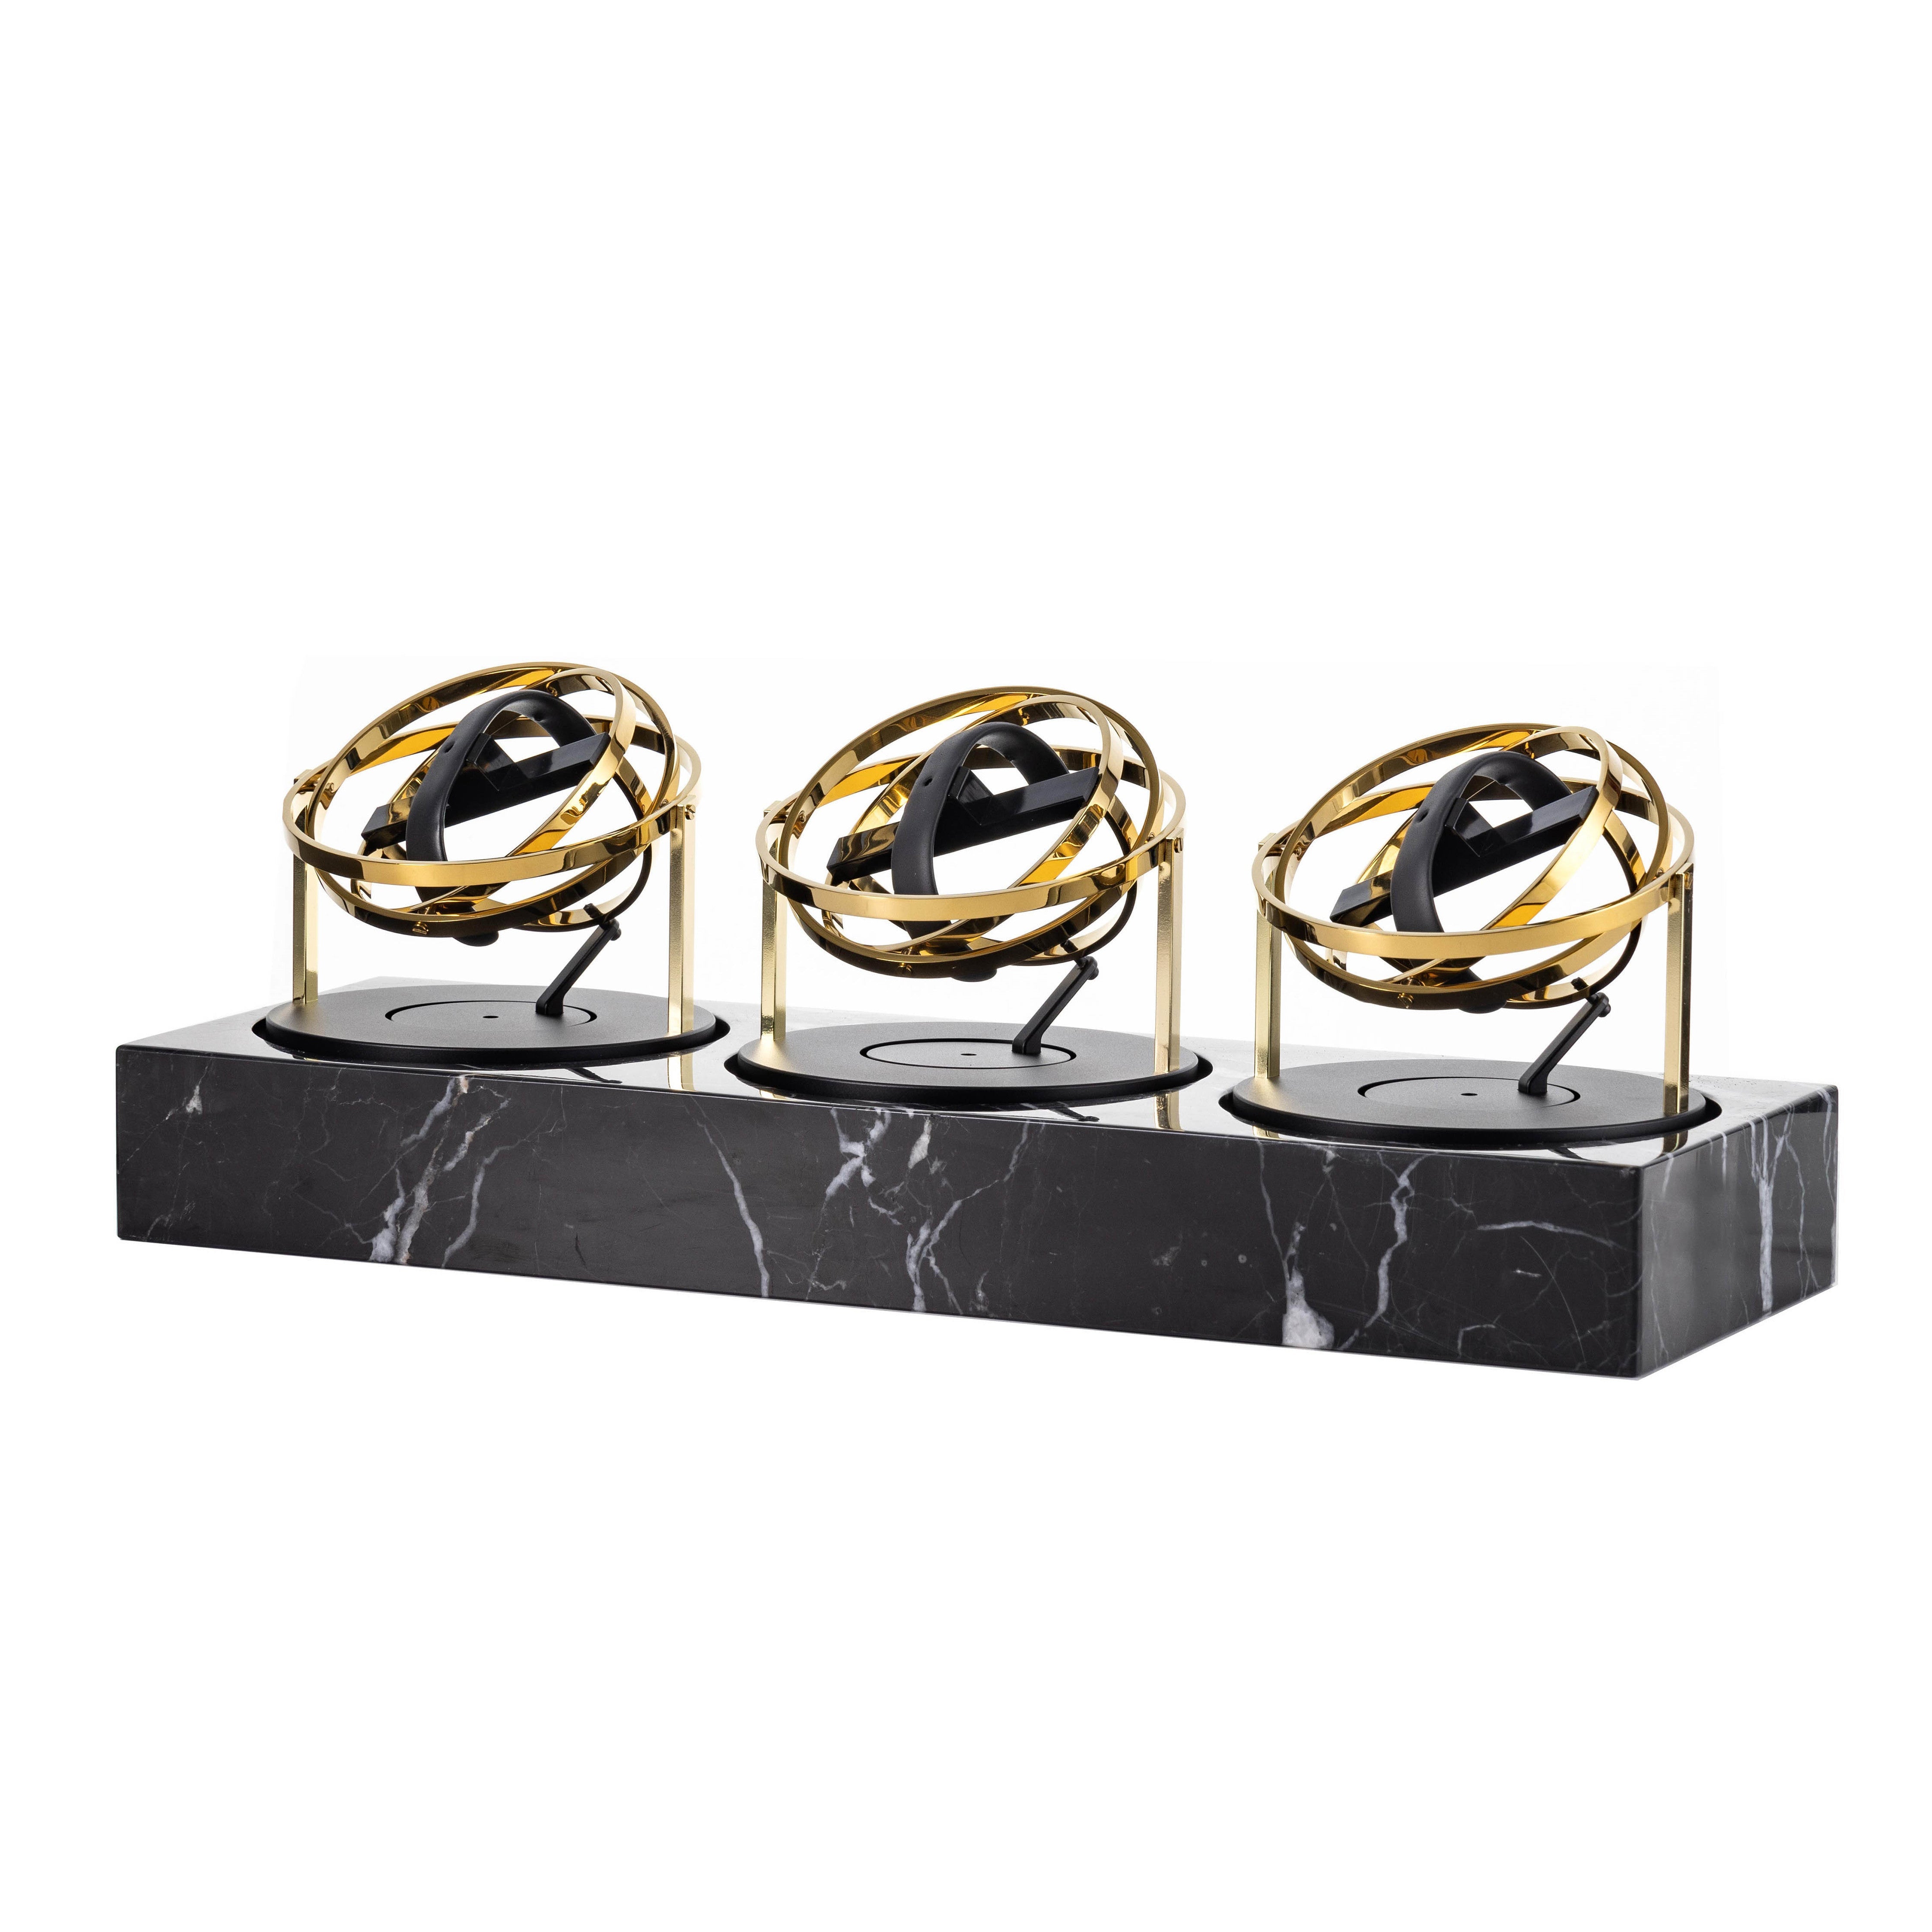 Triple Watch Winder - Astronomia X1 Gold - Black Marble Edition